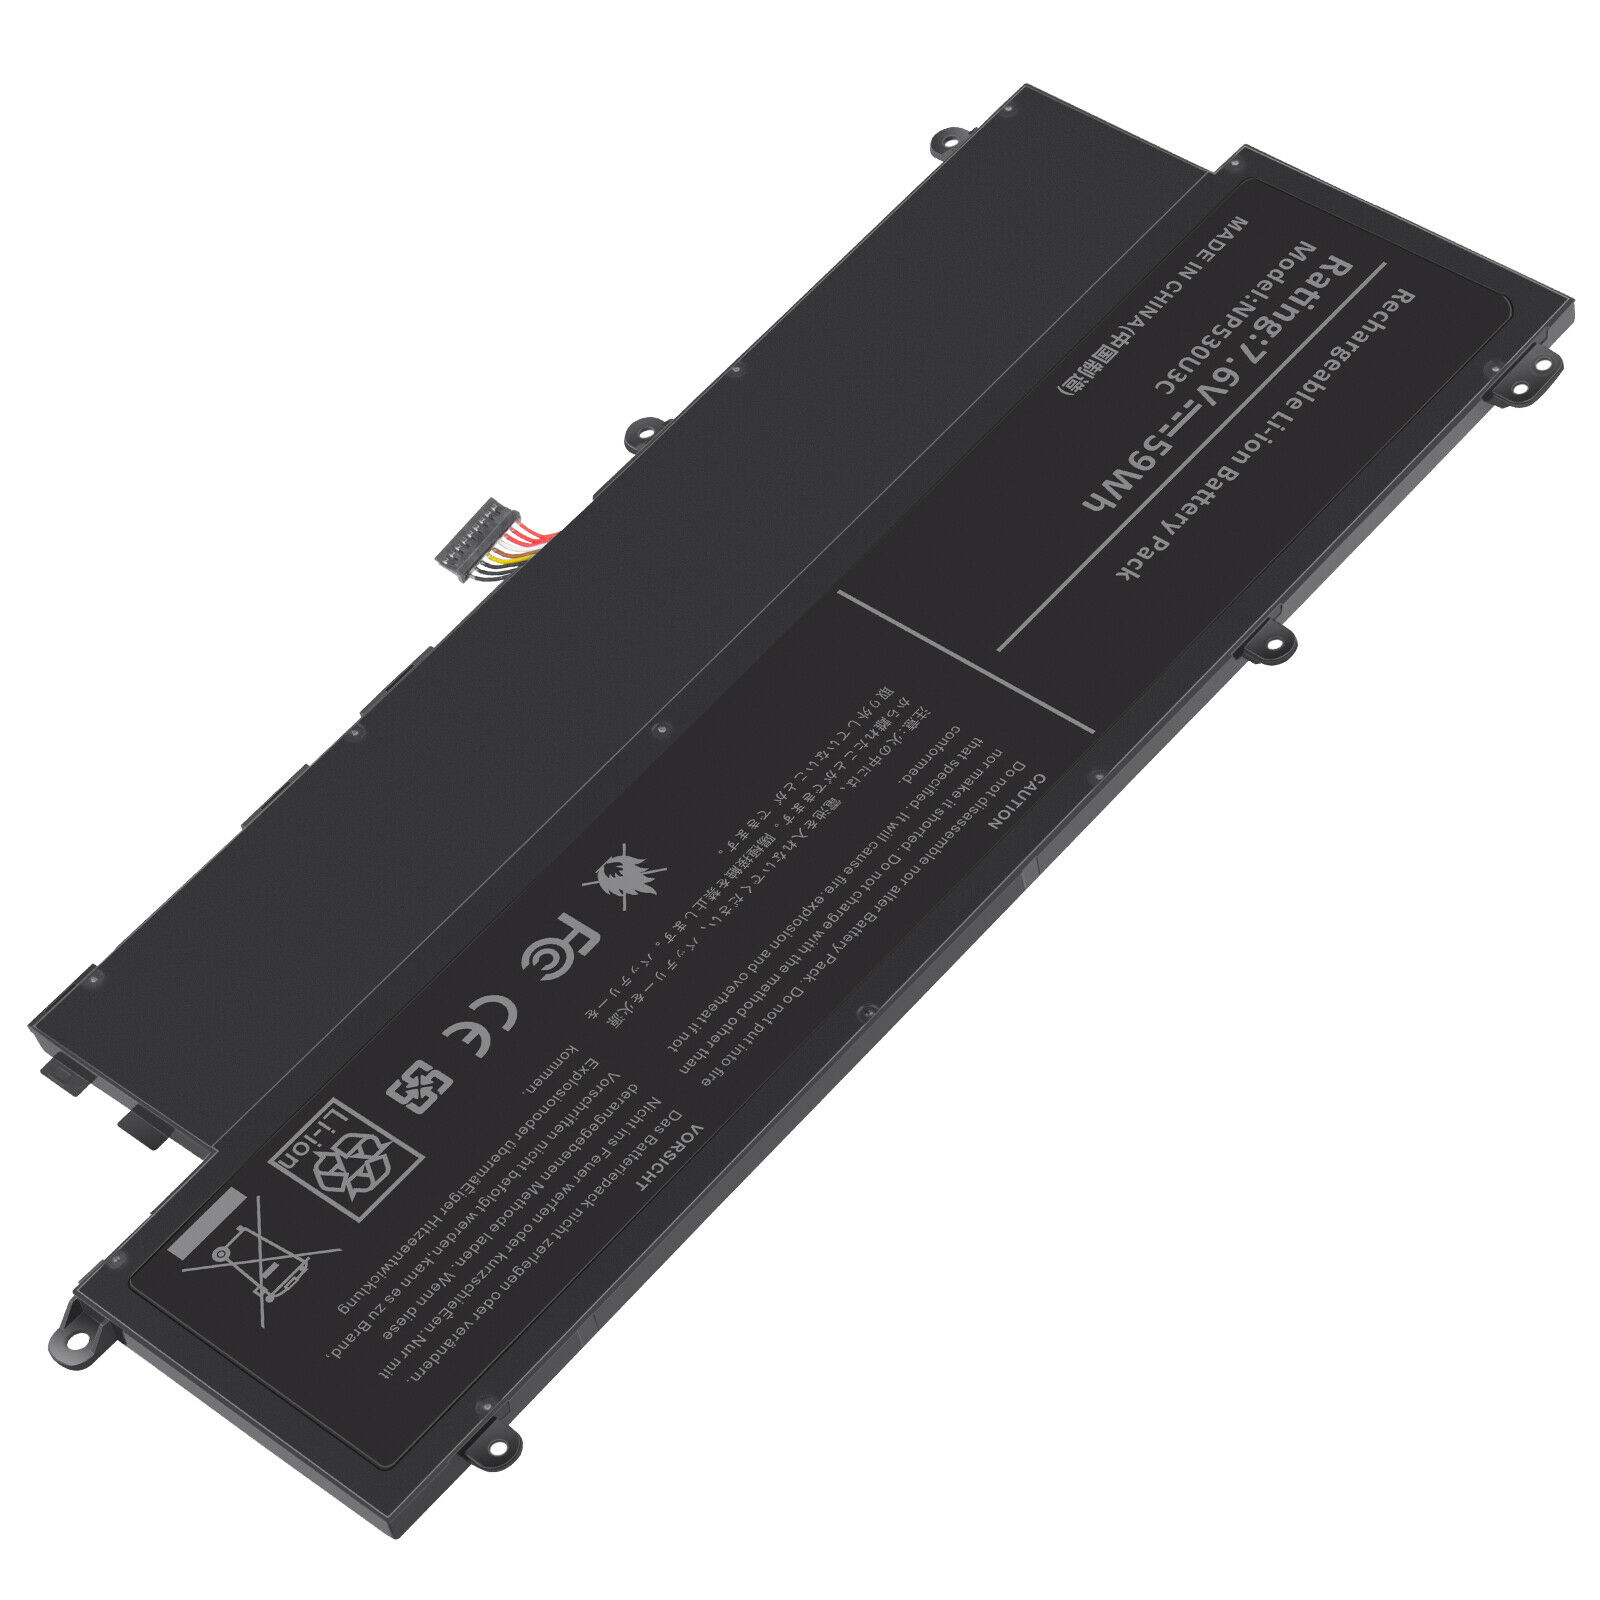 Samsung 530U3C-A06 Replacement Battery 1